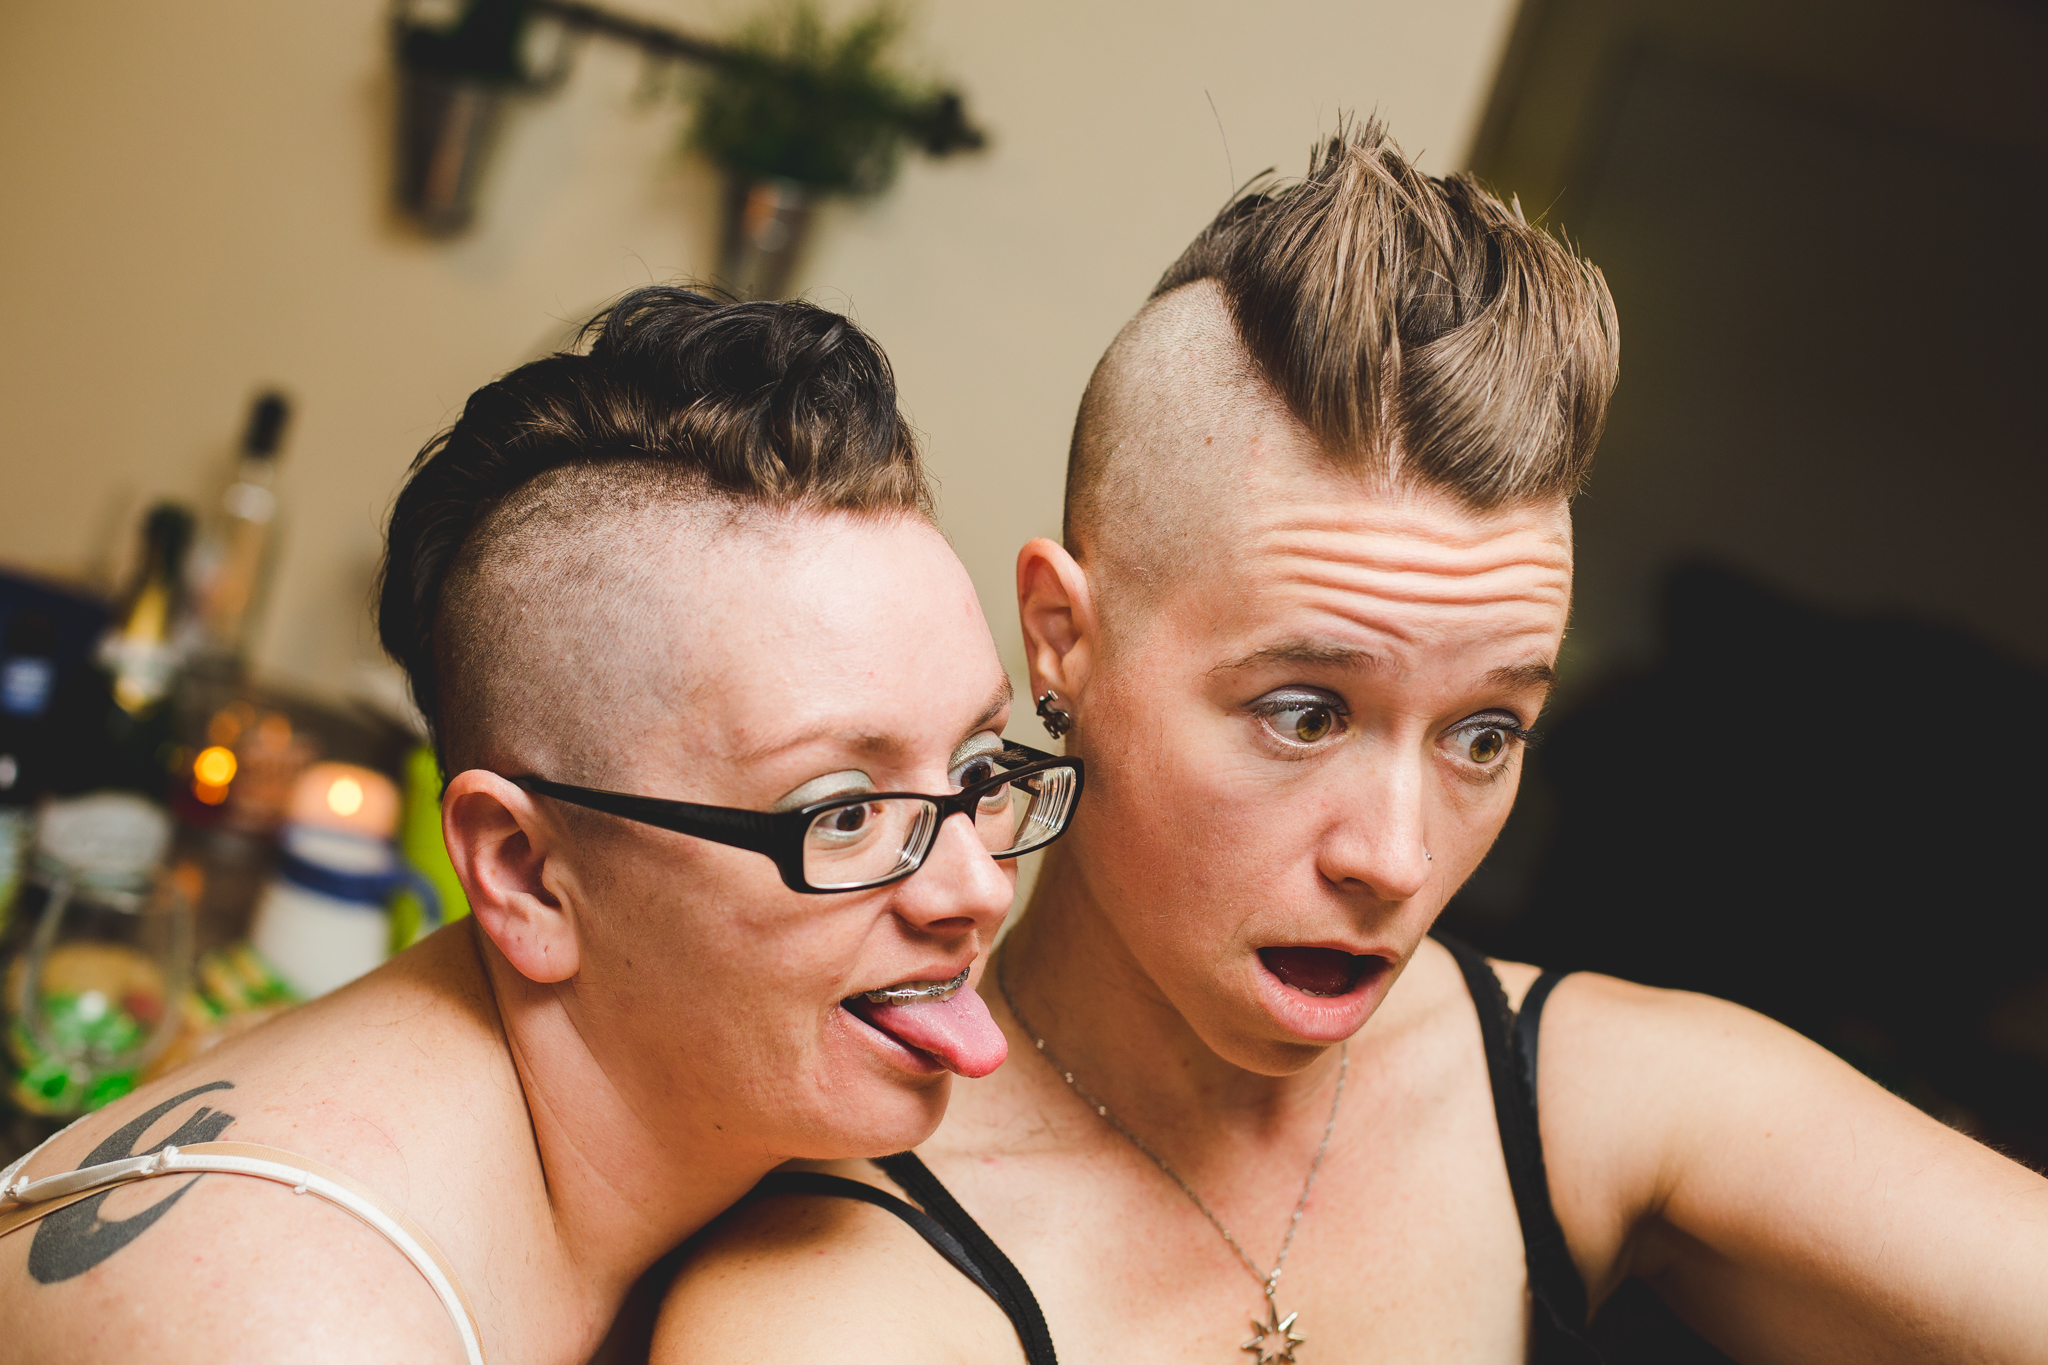 tj and jen pose together for mohawk awesomeness